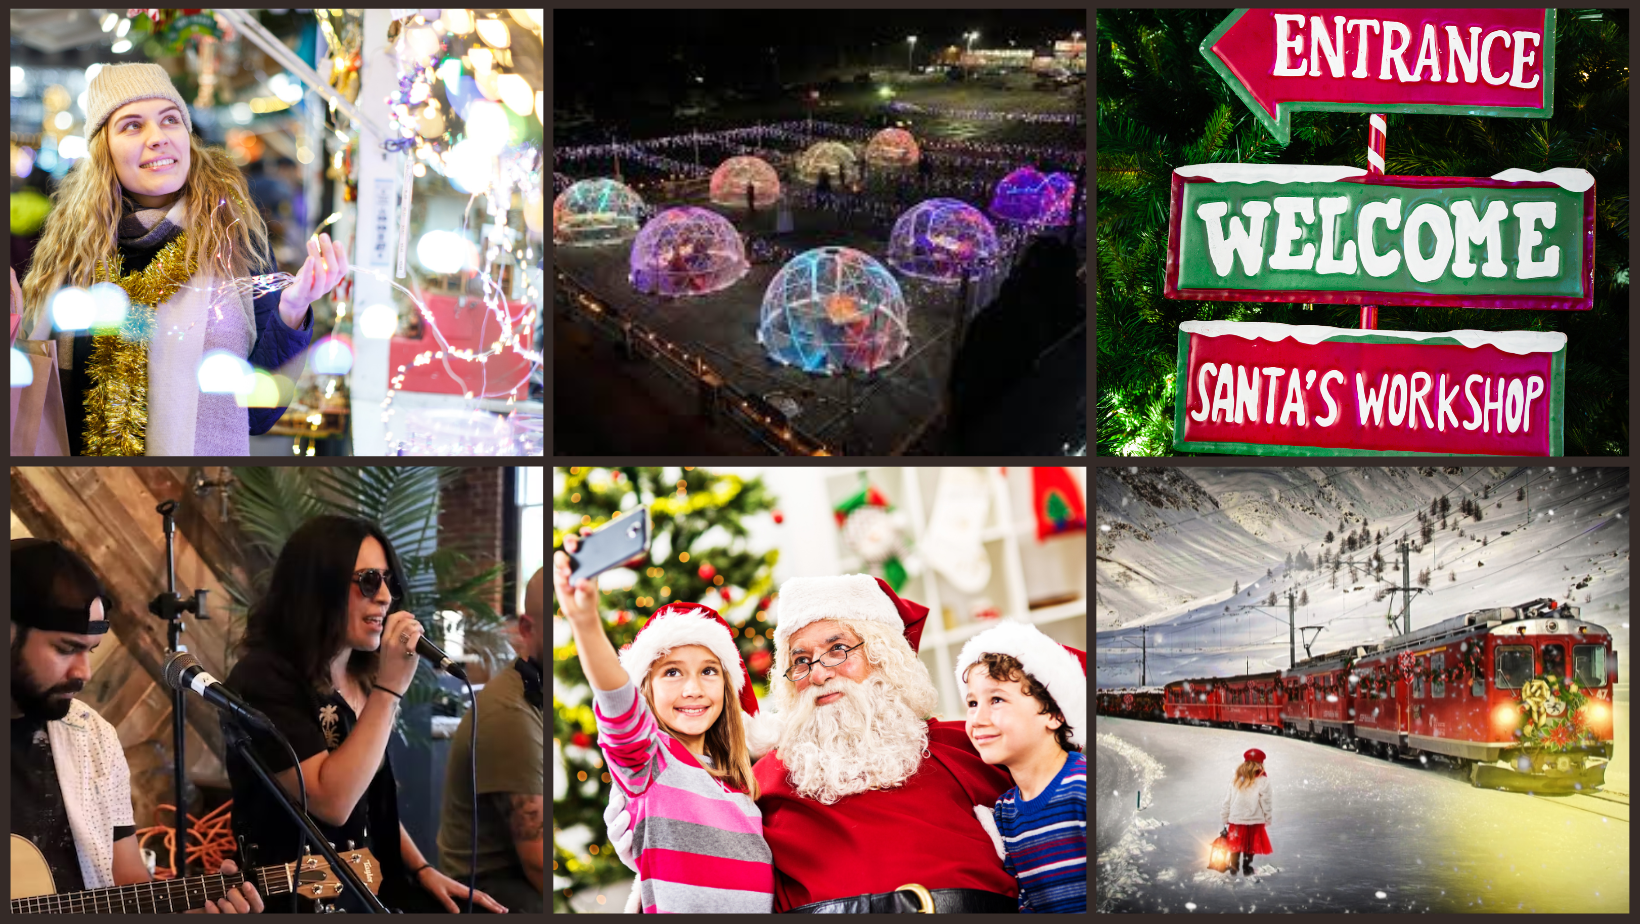 a welcome sign for santa 's workshop is in the middle of a collage of photos